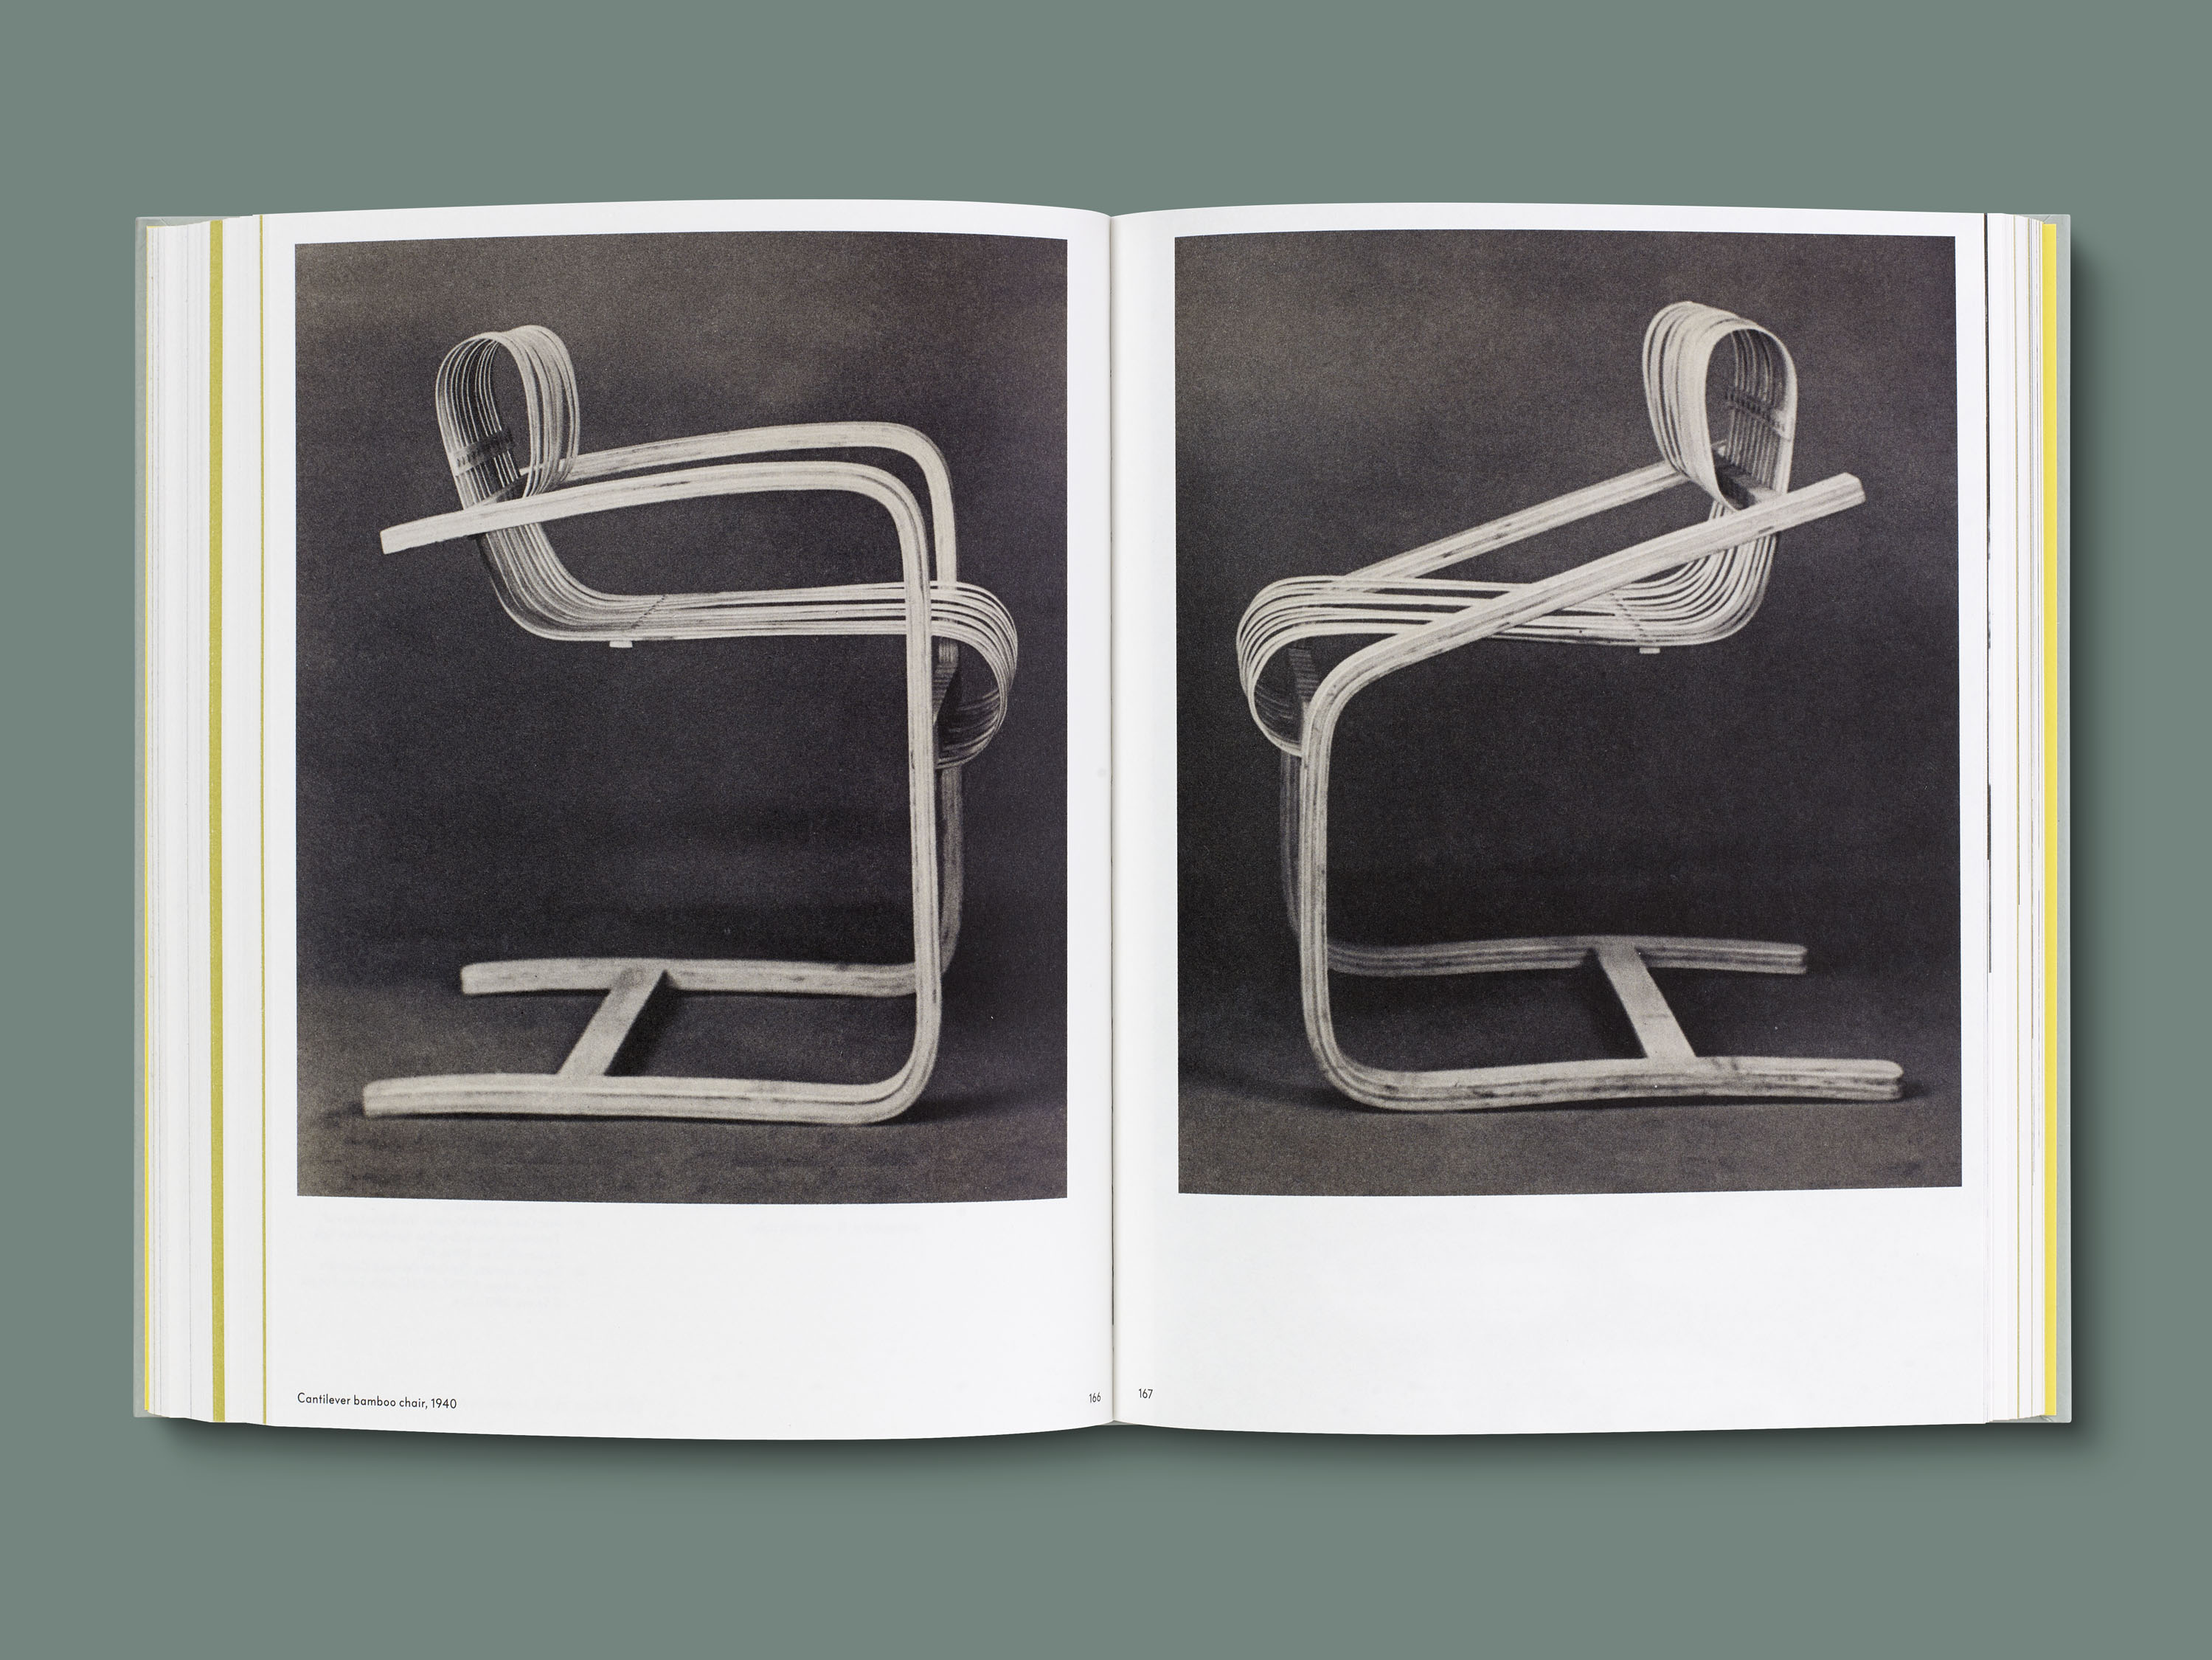 Sketches by Charlotte Perriand Brought to Life